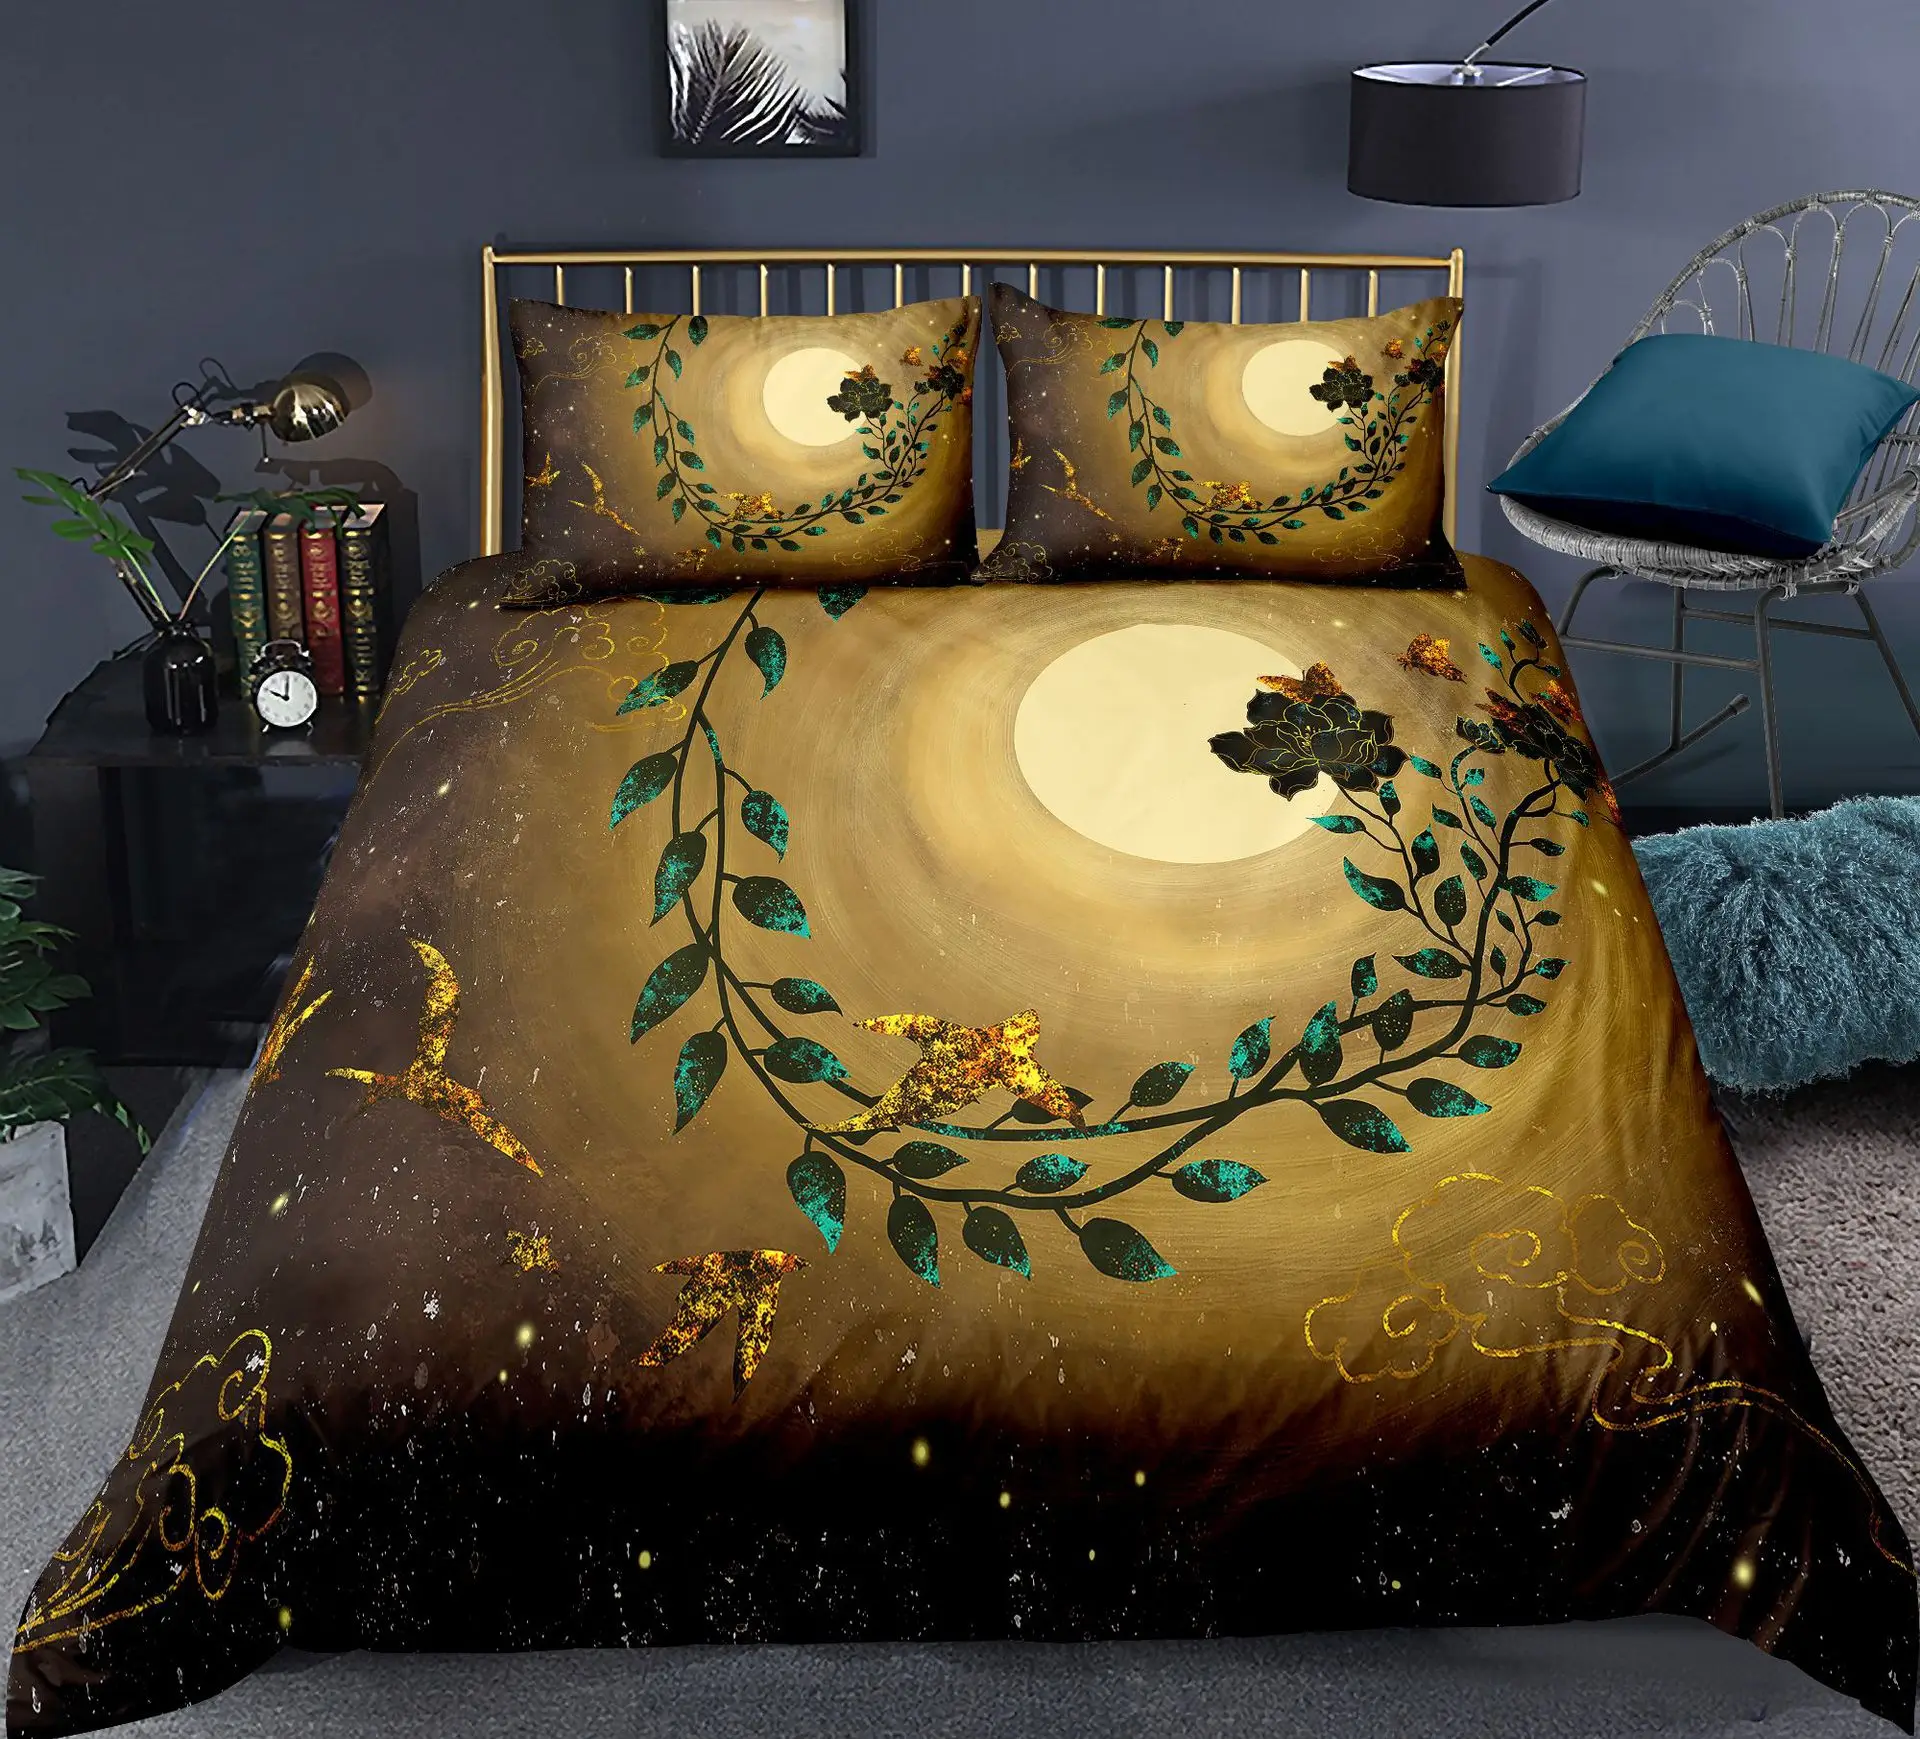 

Chinoiserie Animal Polyester Duvet Cover Set King Colorful Mountain River Landscape Asian Culture Theme for Kids Teens Phoenix